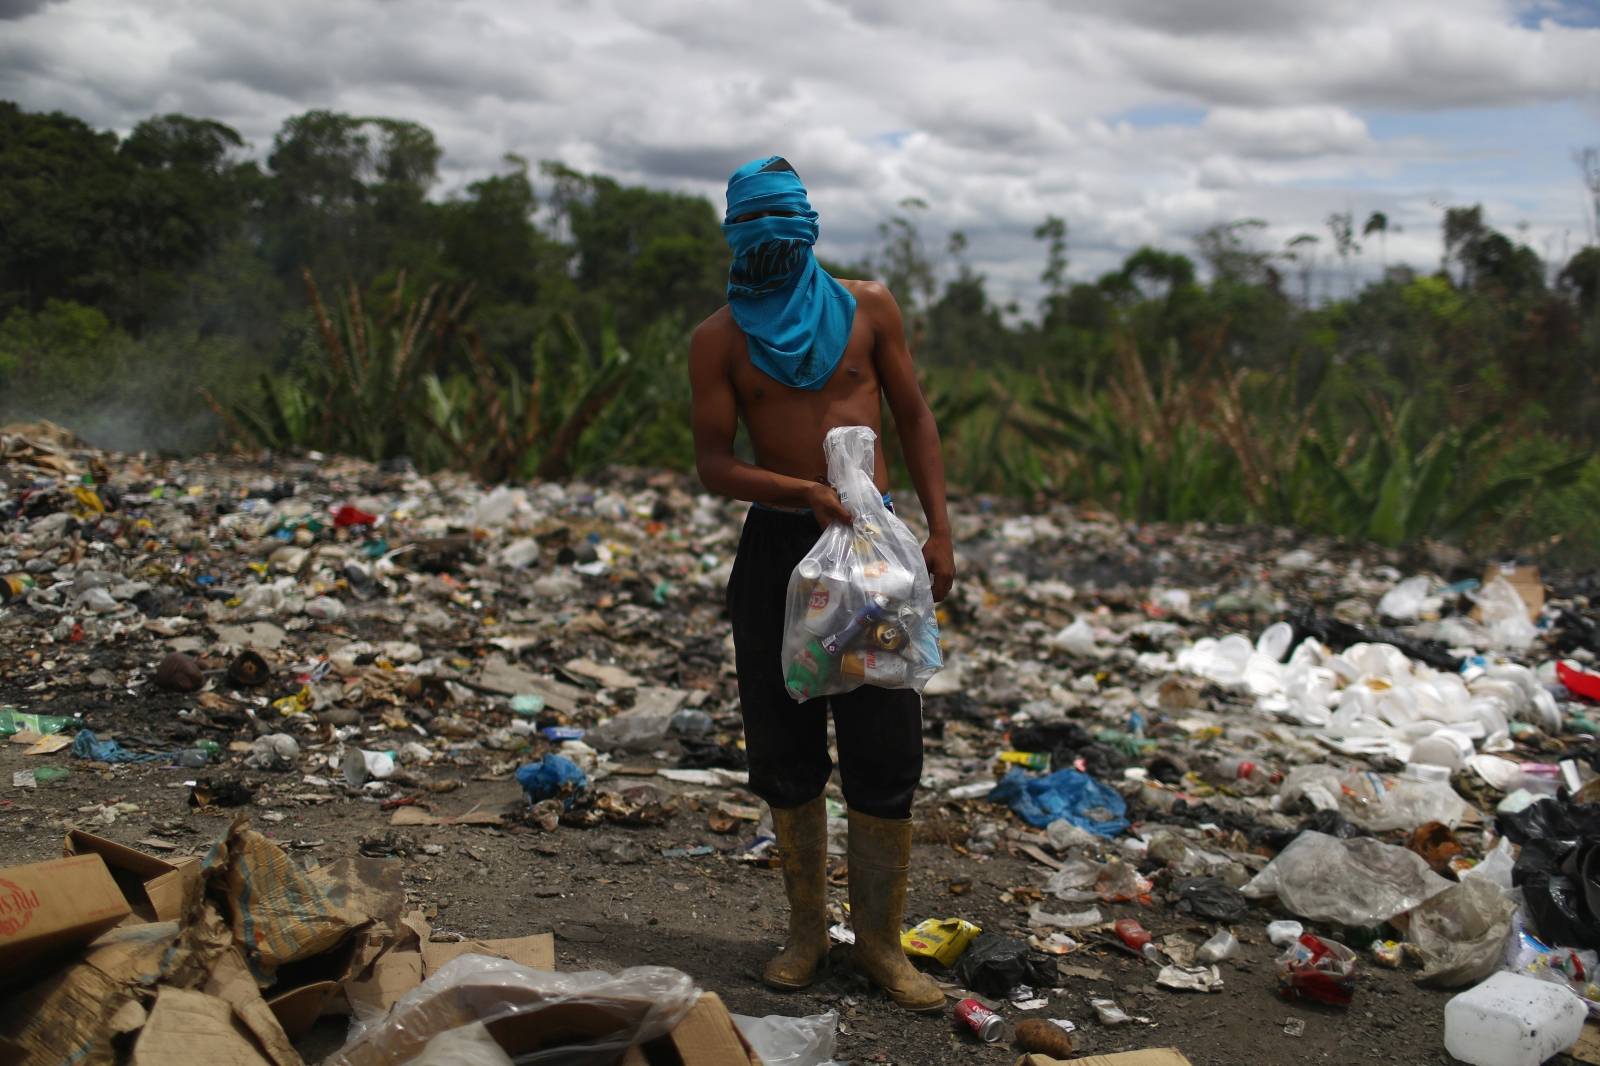 Venezuelan Luis Ortega holds a bag of cans after scraping on a garbage dump in the border city of Pacaraima